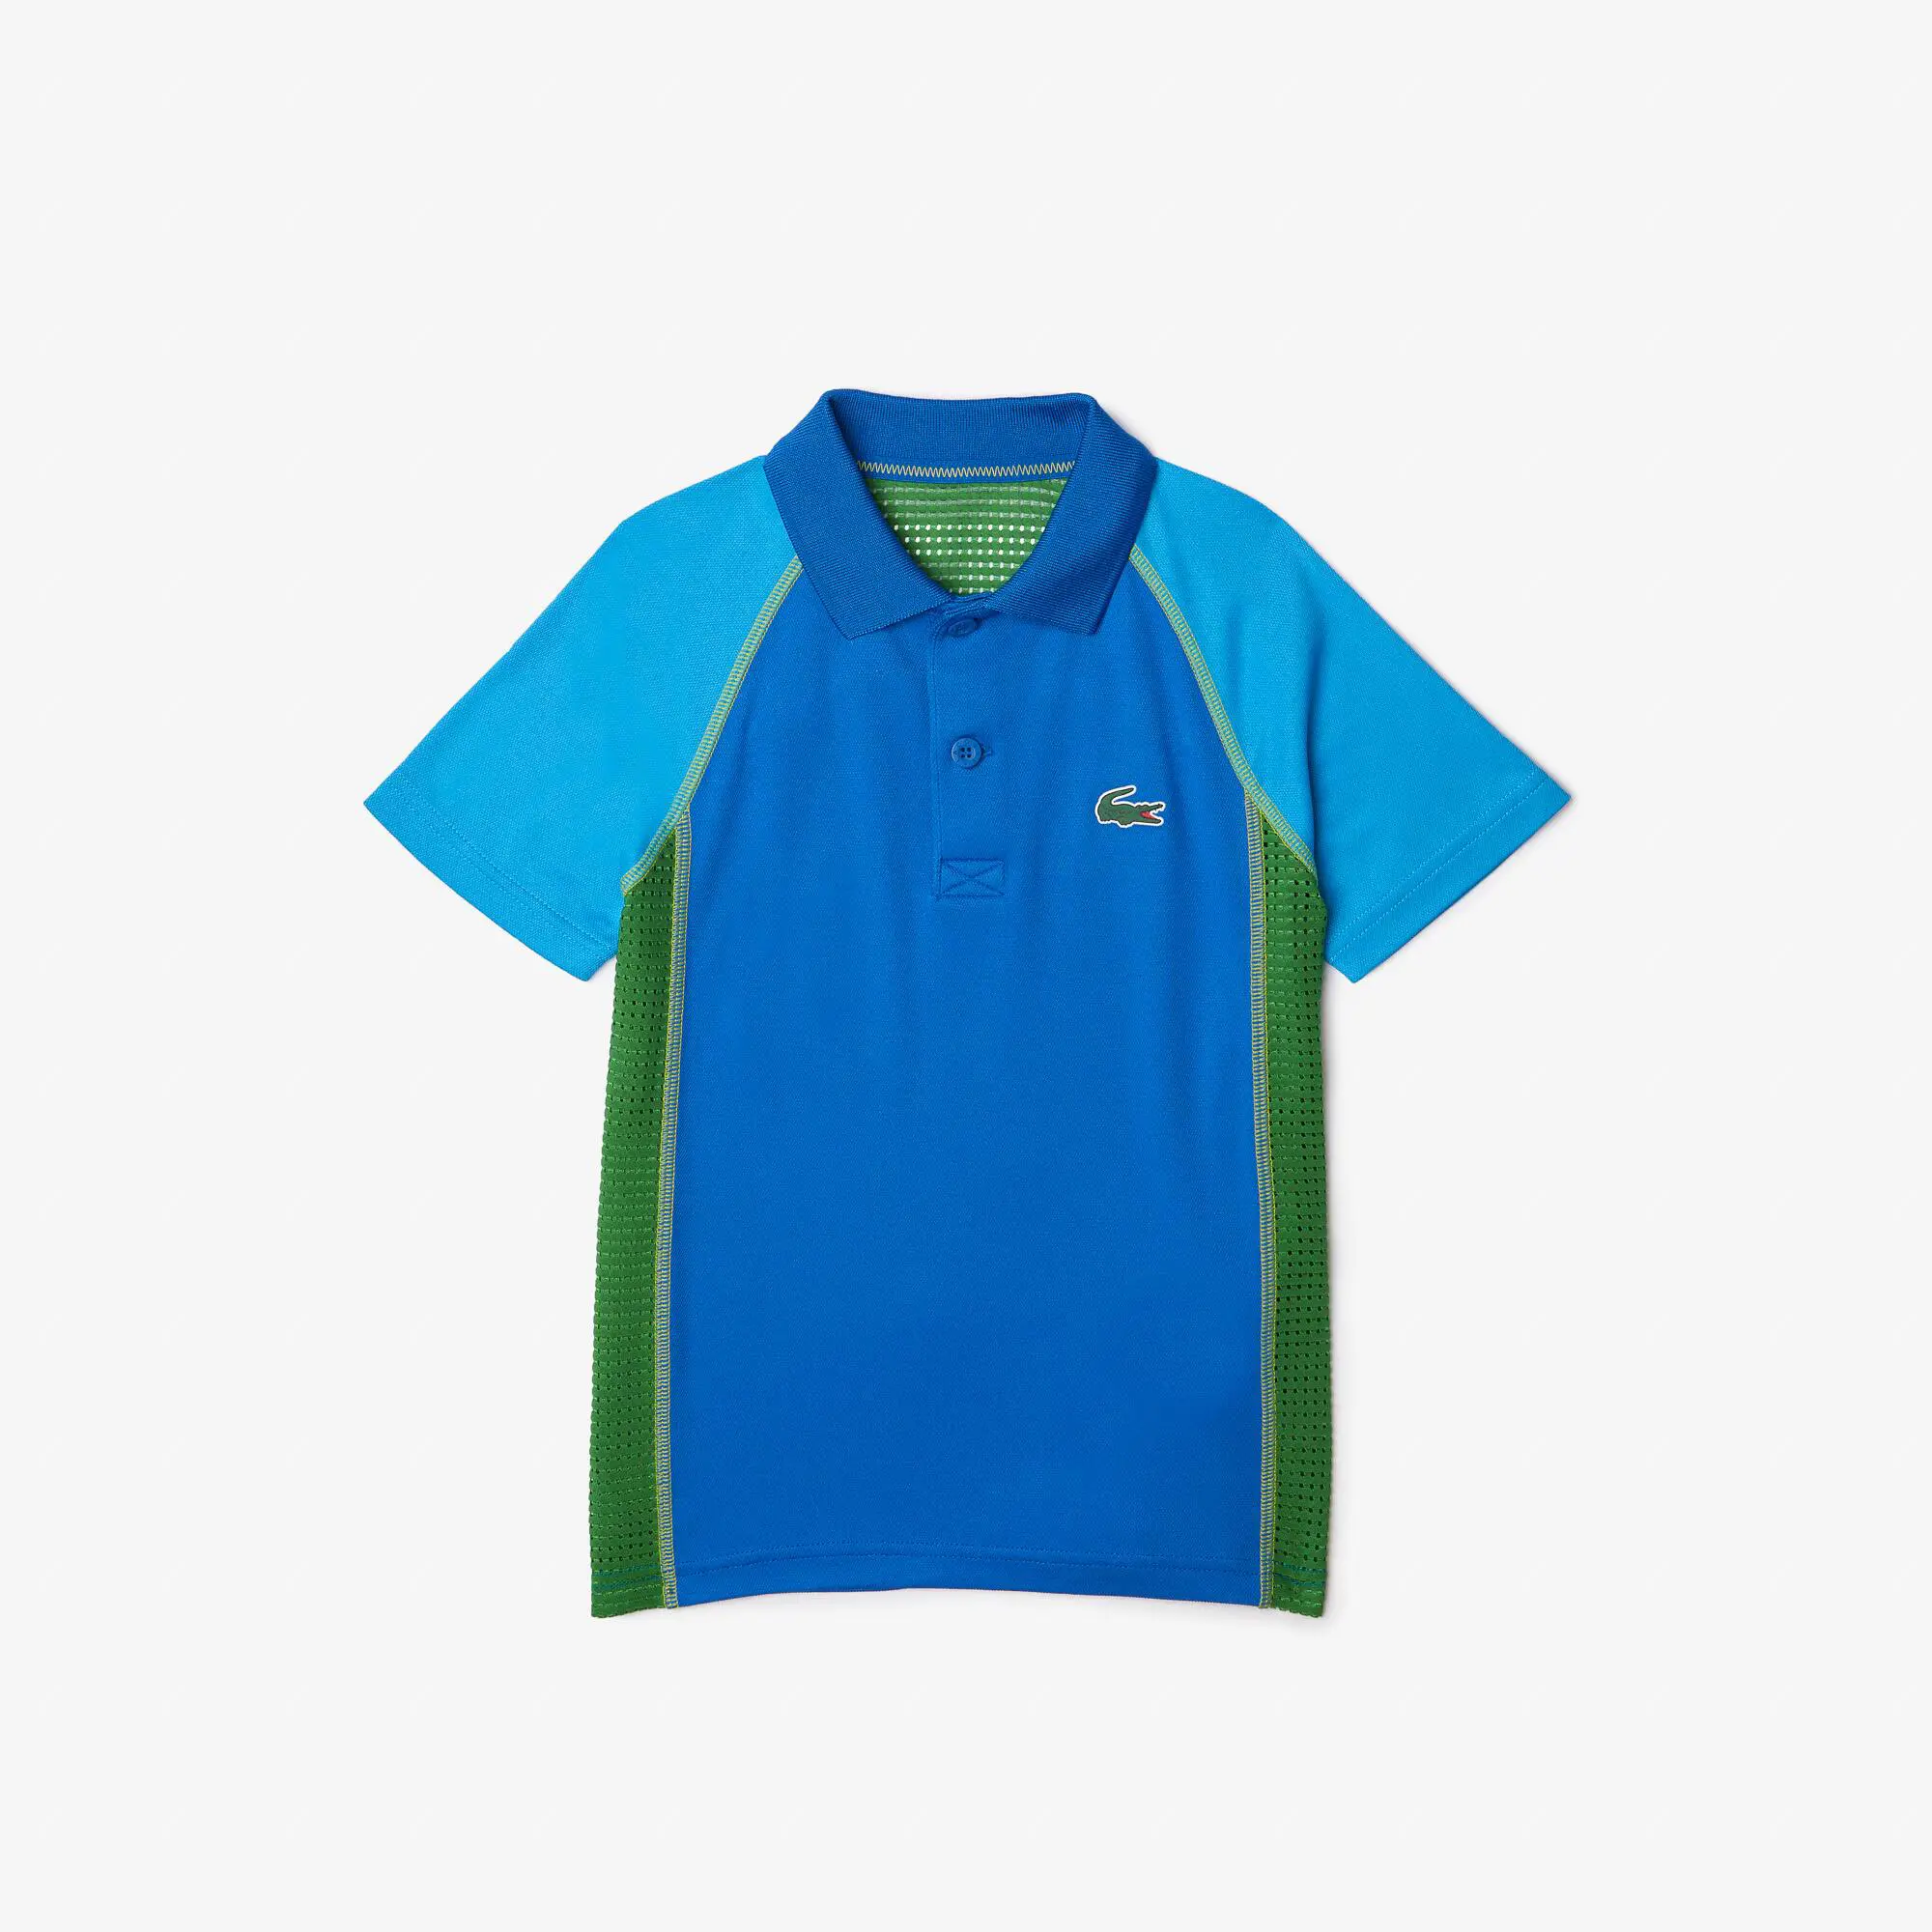 Lacoste Boys’ Lacoste Tennis Polo Shirt in Ultra-Dry Recycled Polyester. 2